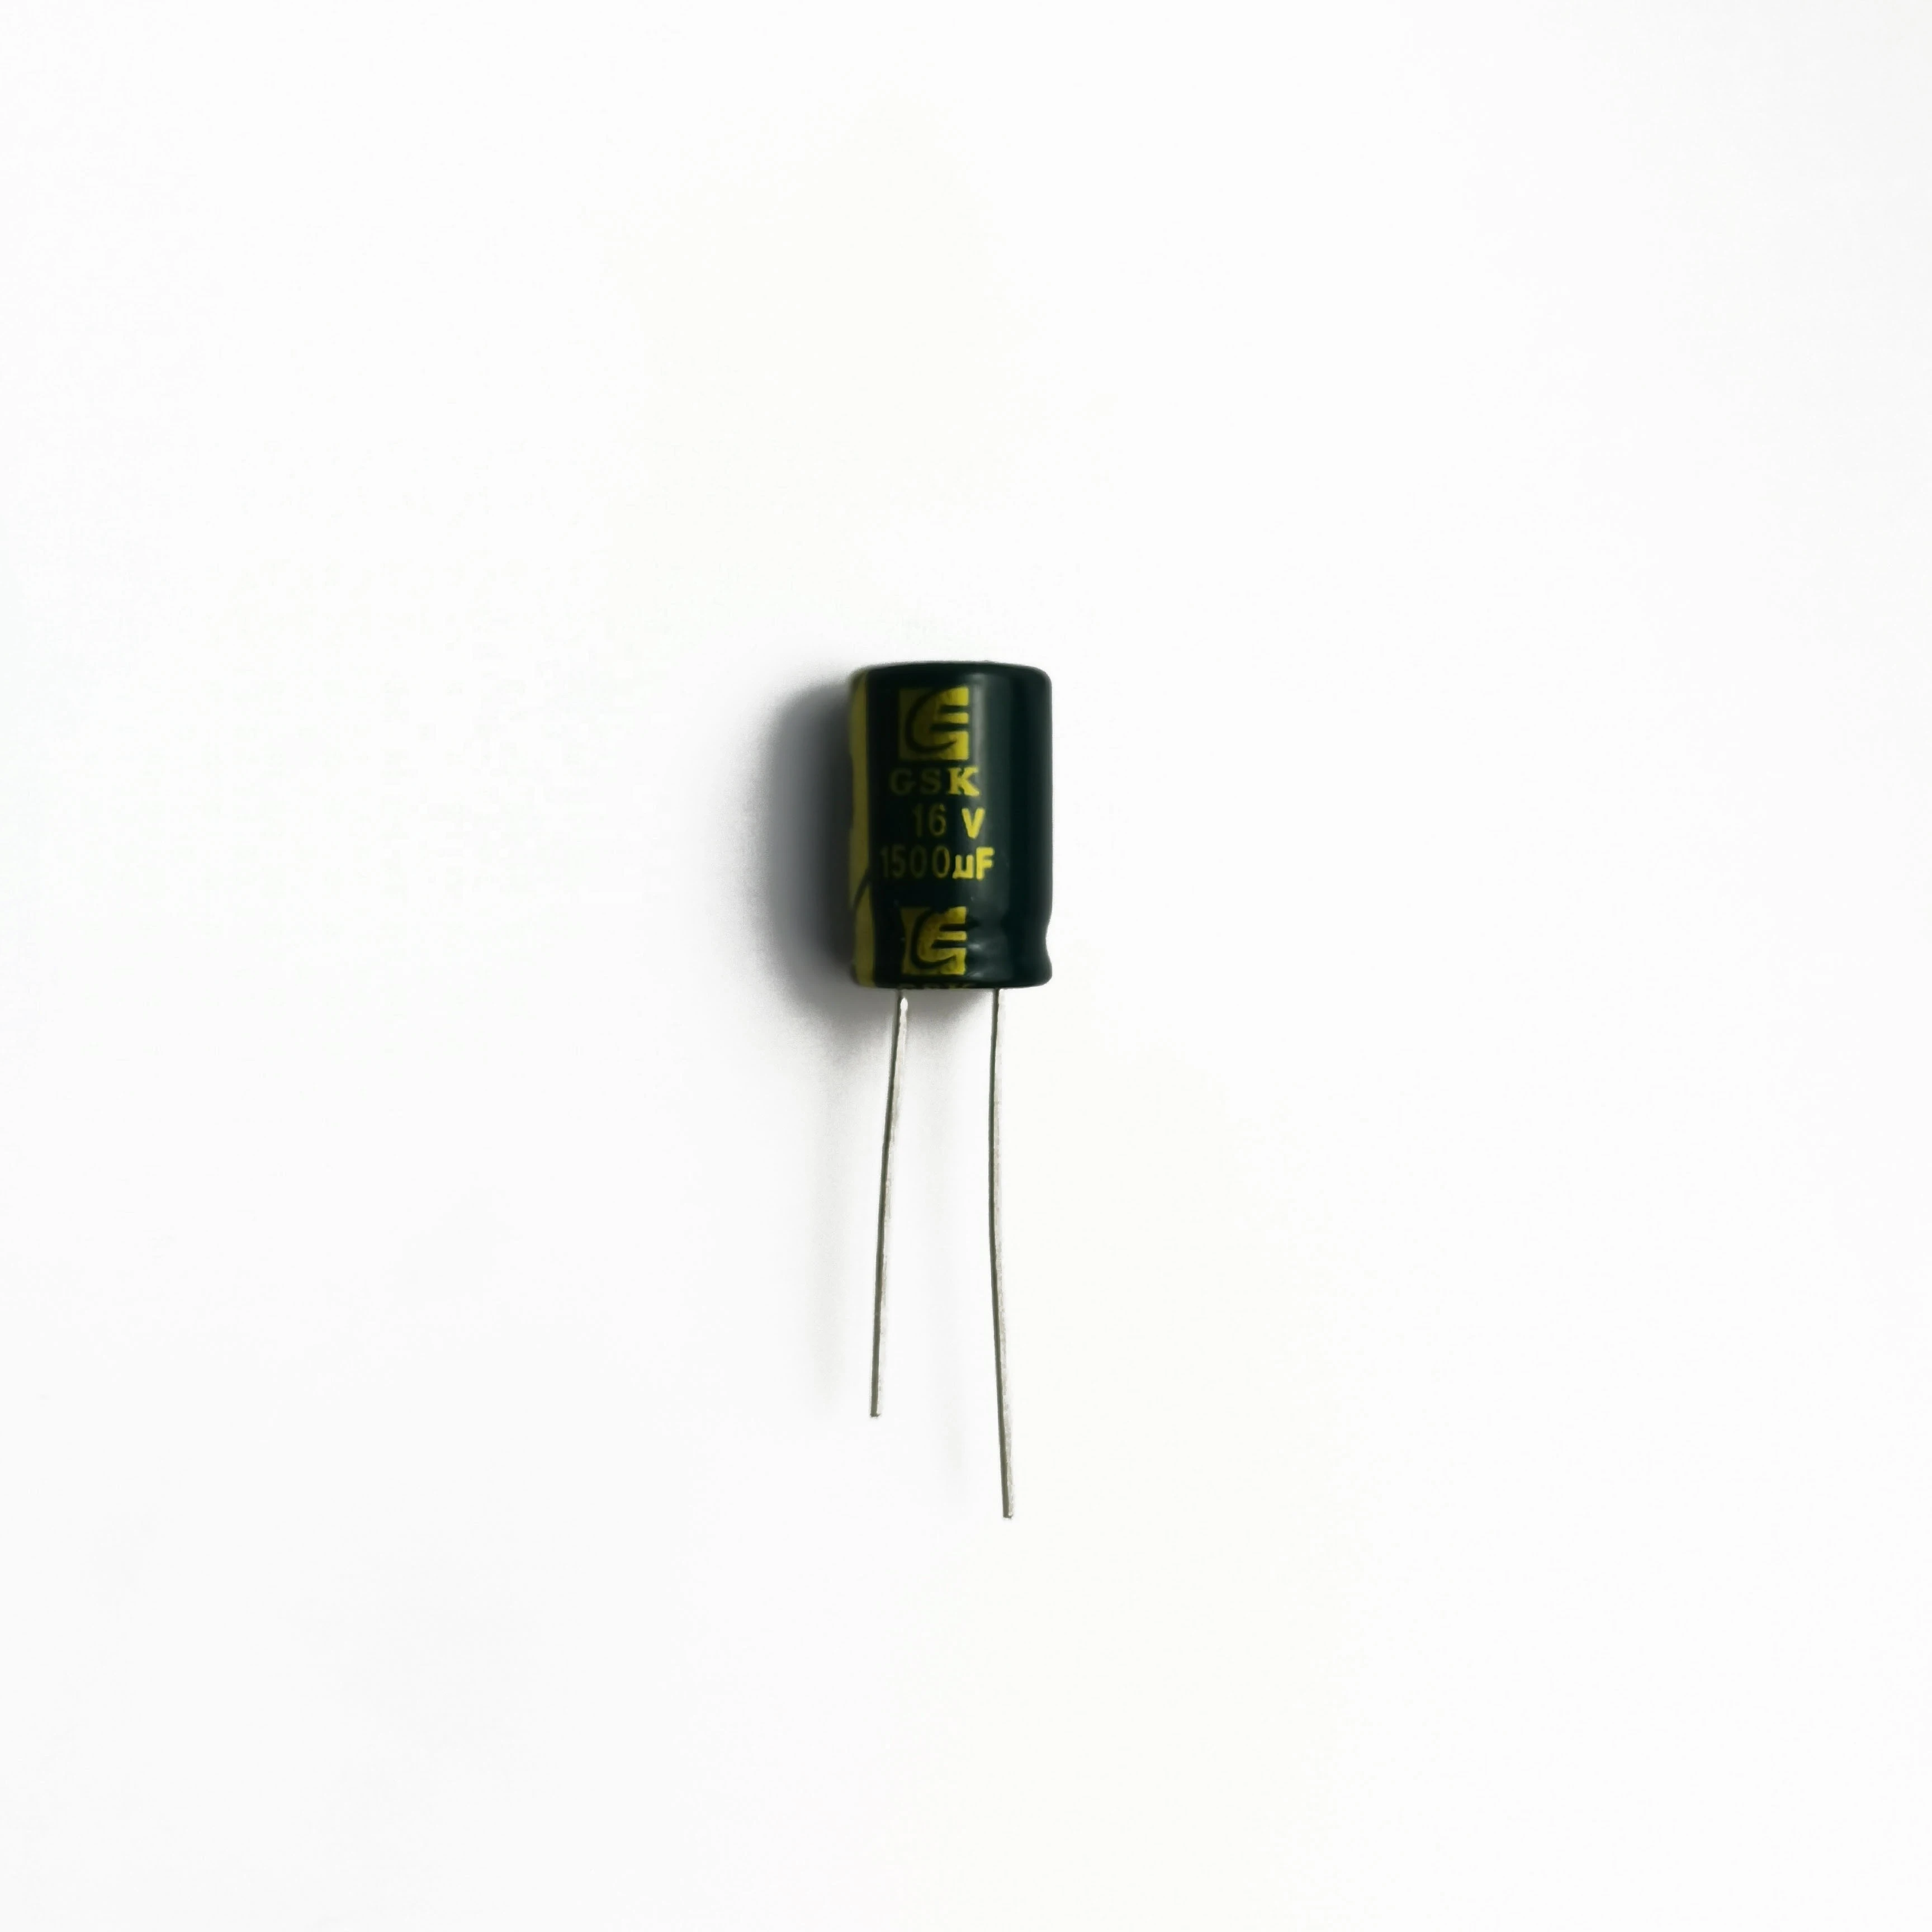 Plug-in Electrolytic capacitor  25V  1000UF 20% with competitive price